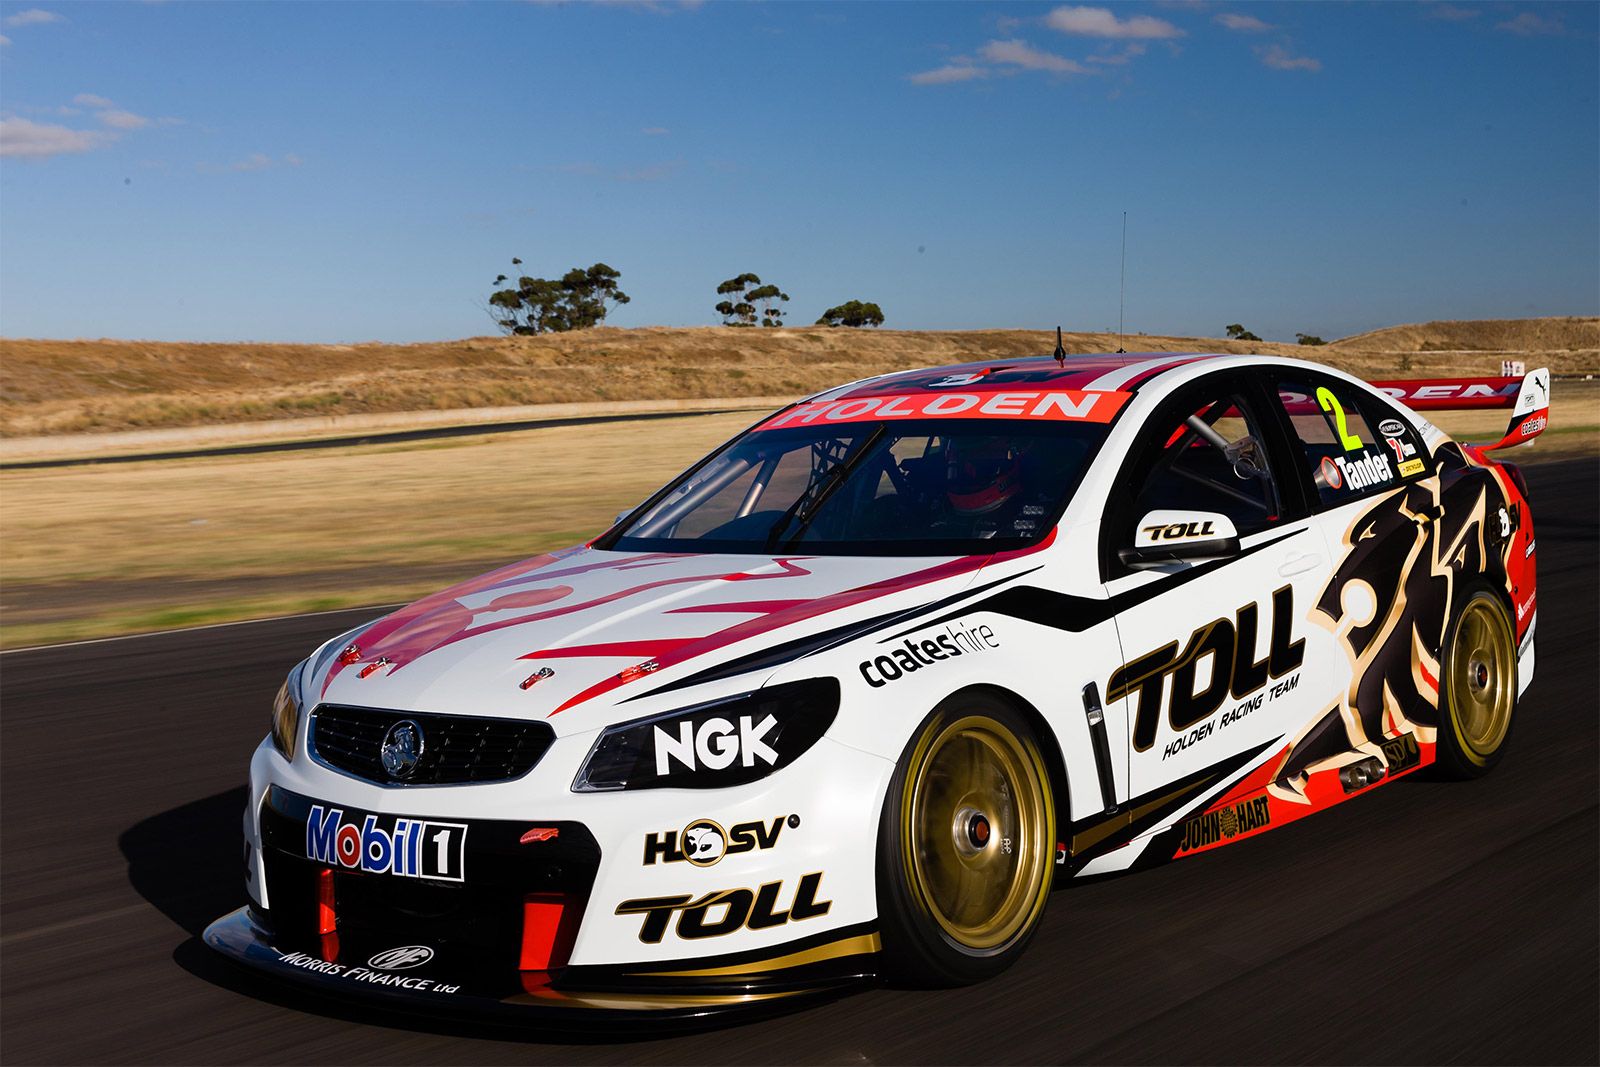 2013 Holden VF Commodore V8 Supercars Racecar by Holden Racing Team